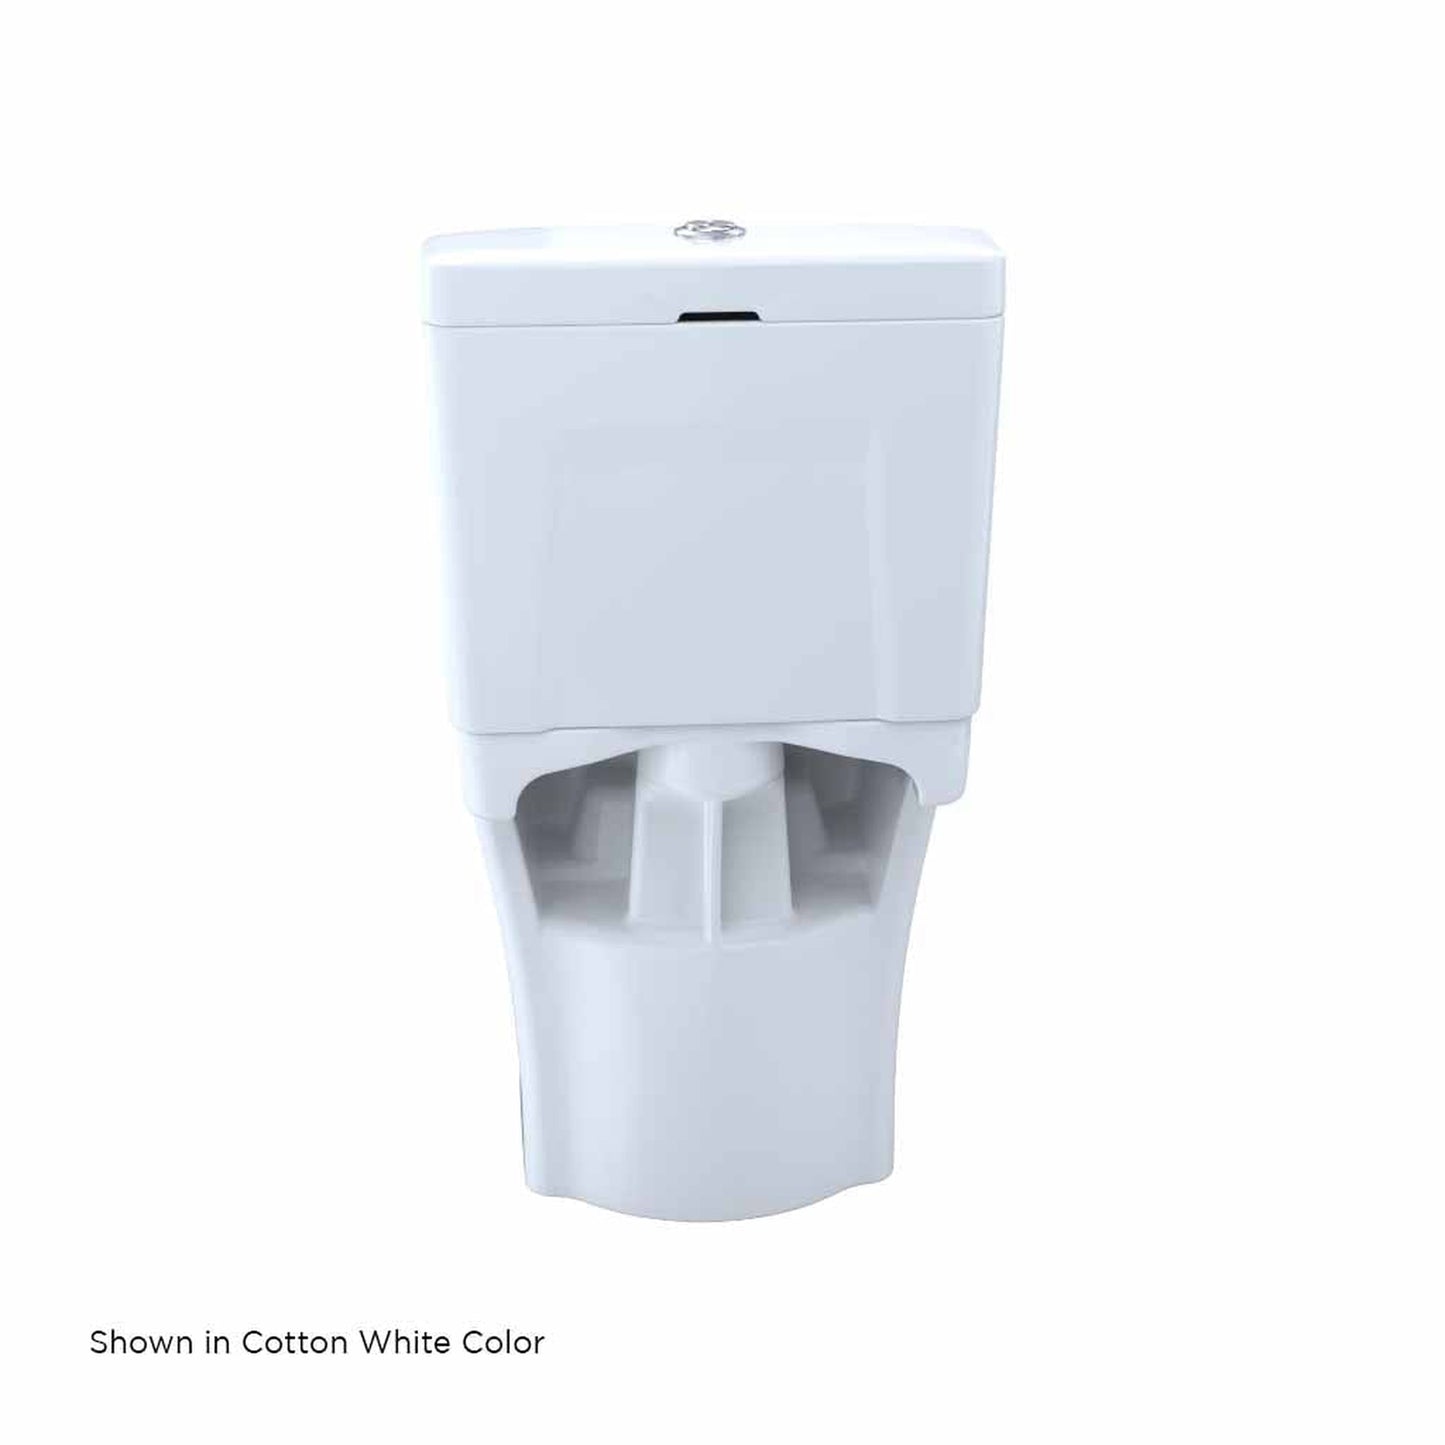 TOTO Aquia IV Bone 1.0 GPF & 0.8 GPF Dual-Flush Two-Piece Elongated Toilet With WASHLET+ Connection - SoftClose Seat Included